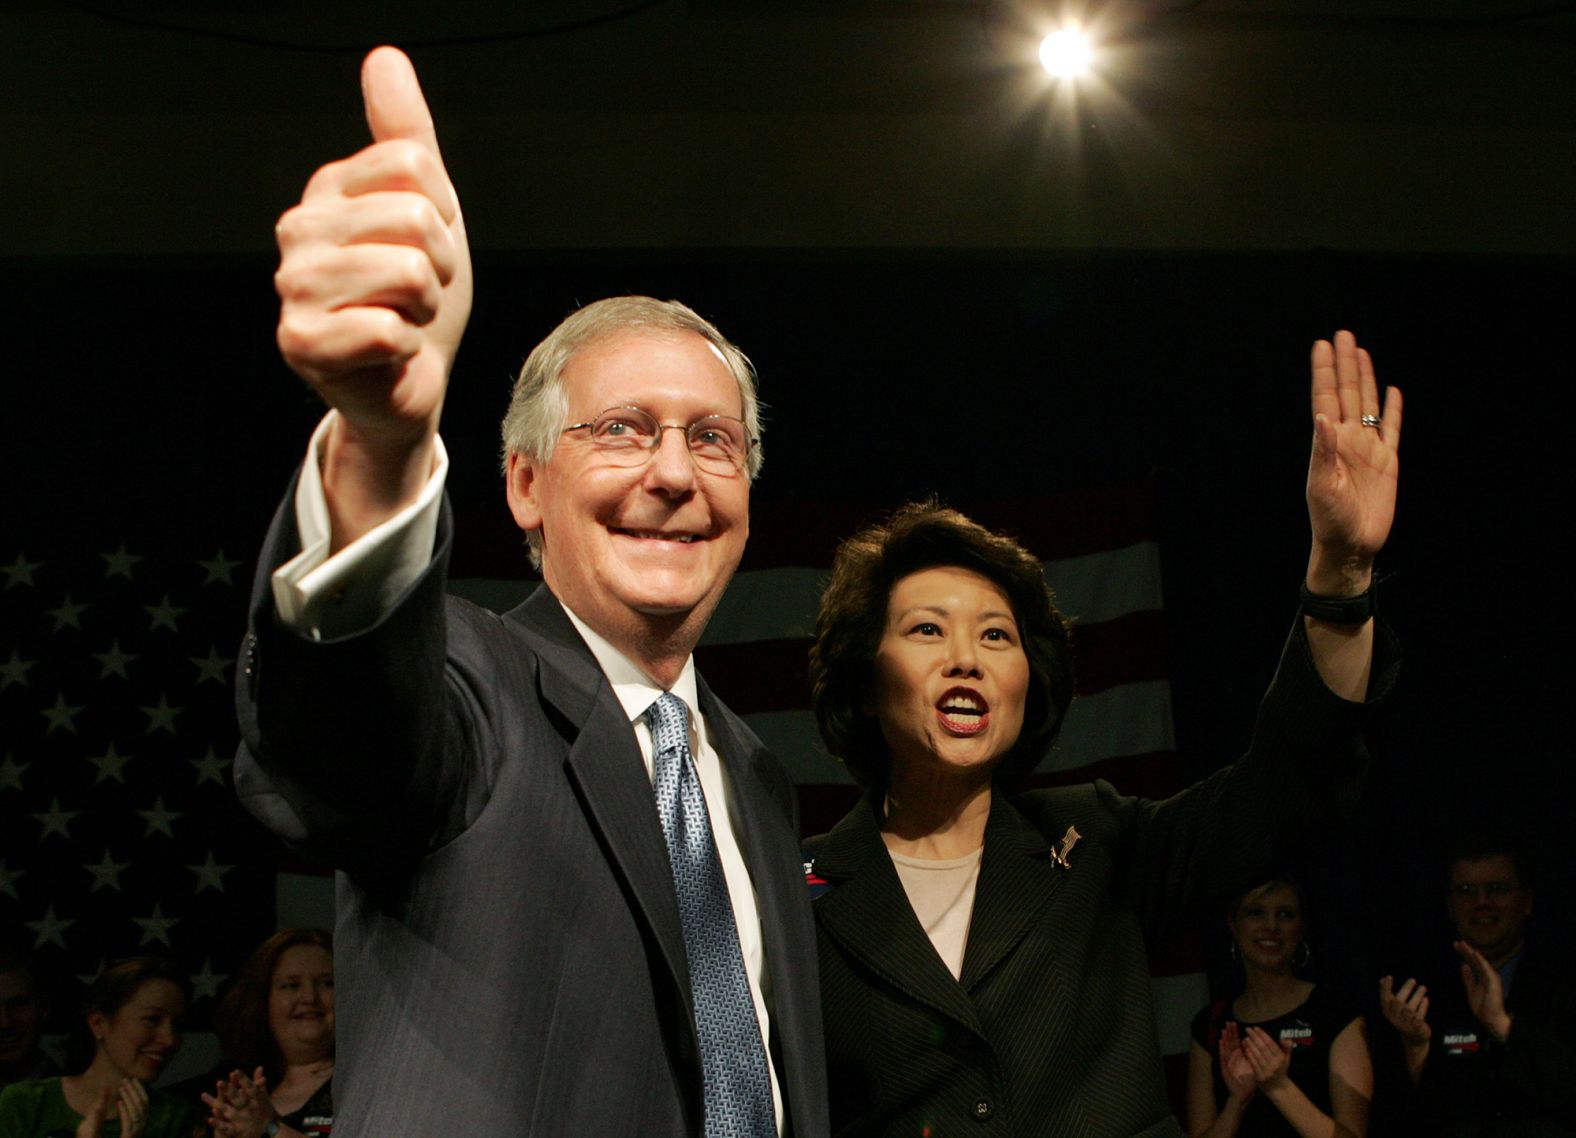 McConnell and Chao greet supporters after learning that he had won reelection in November 2008.